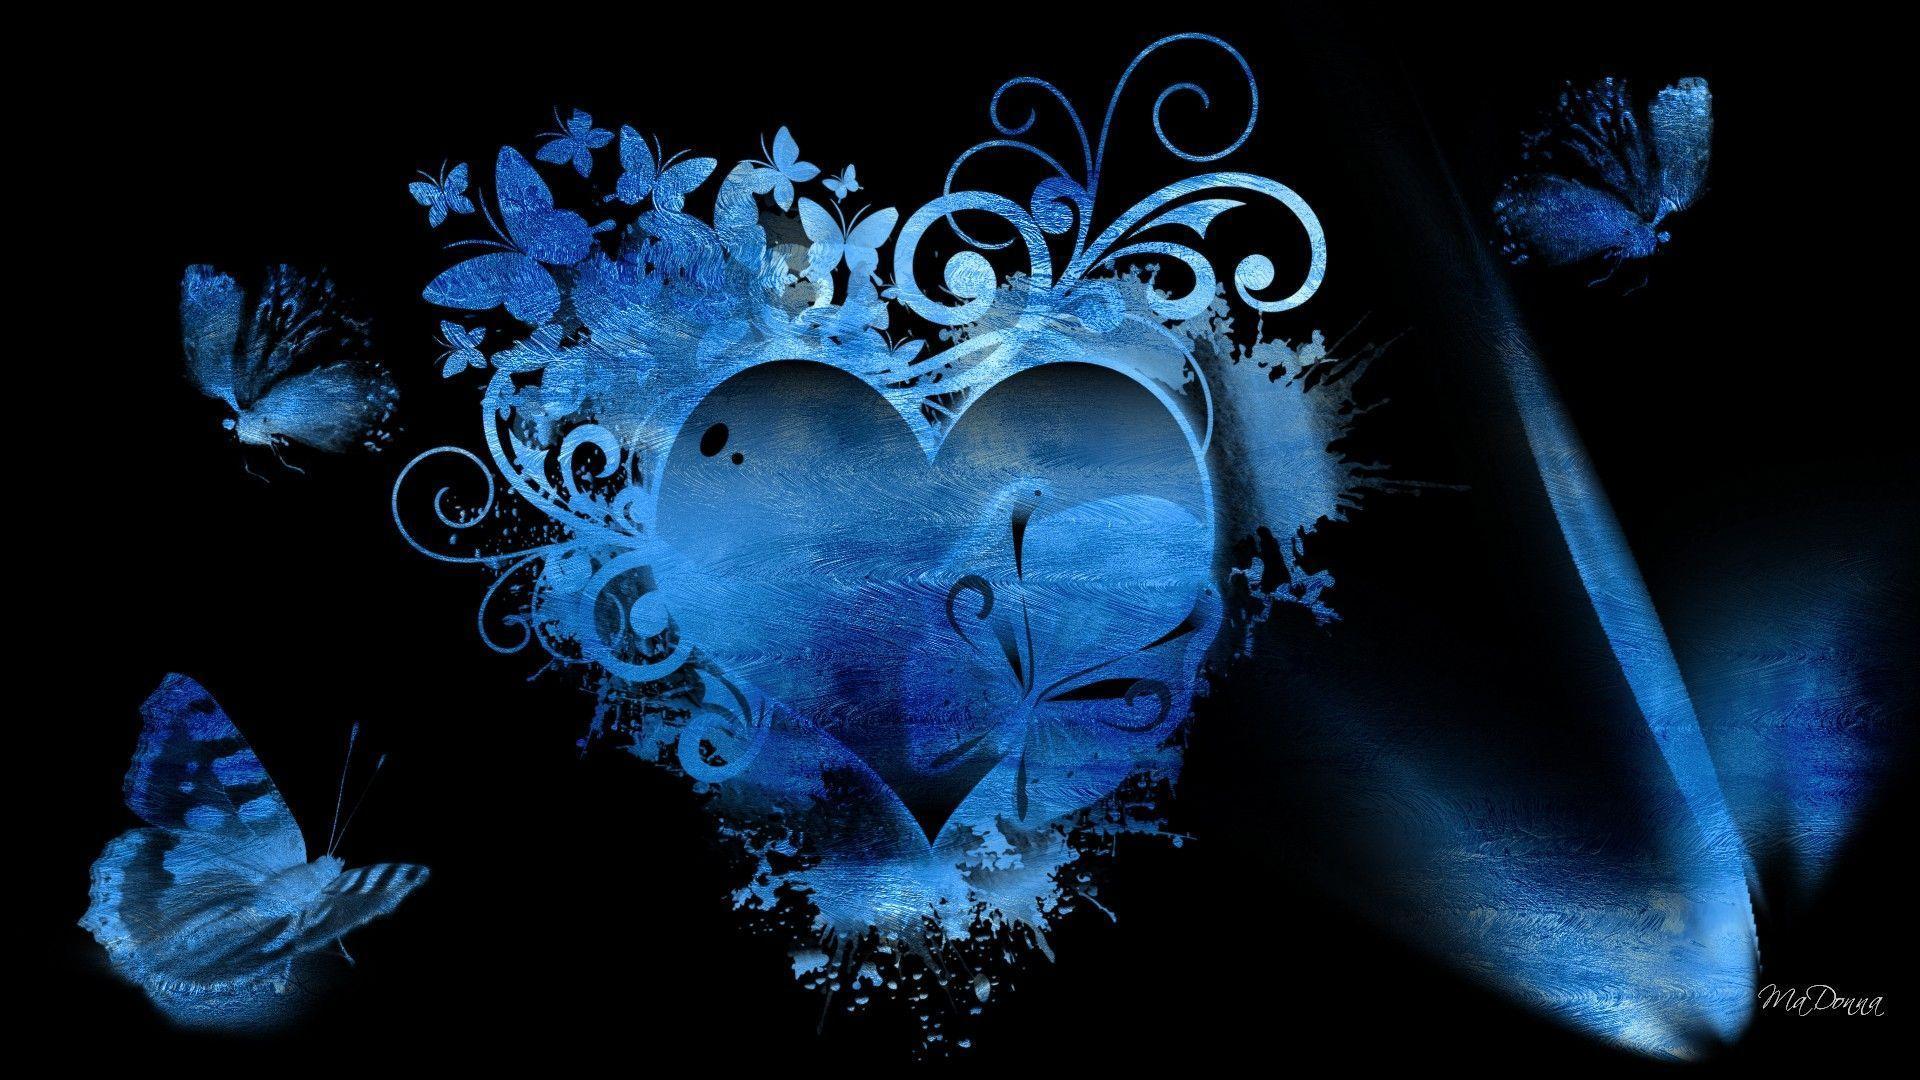 Blue Hearts Wallpapers - Wallpaper Cave